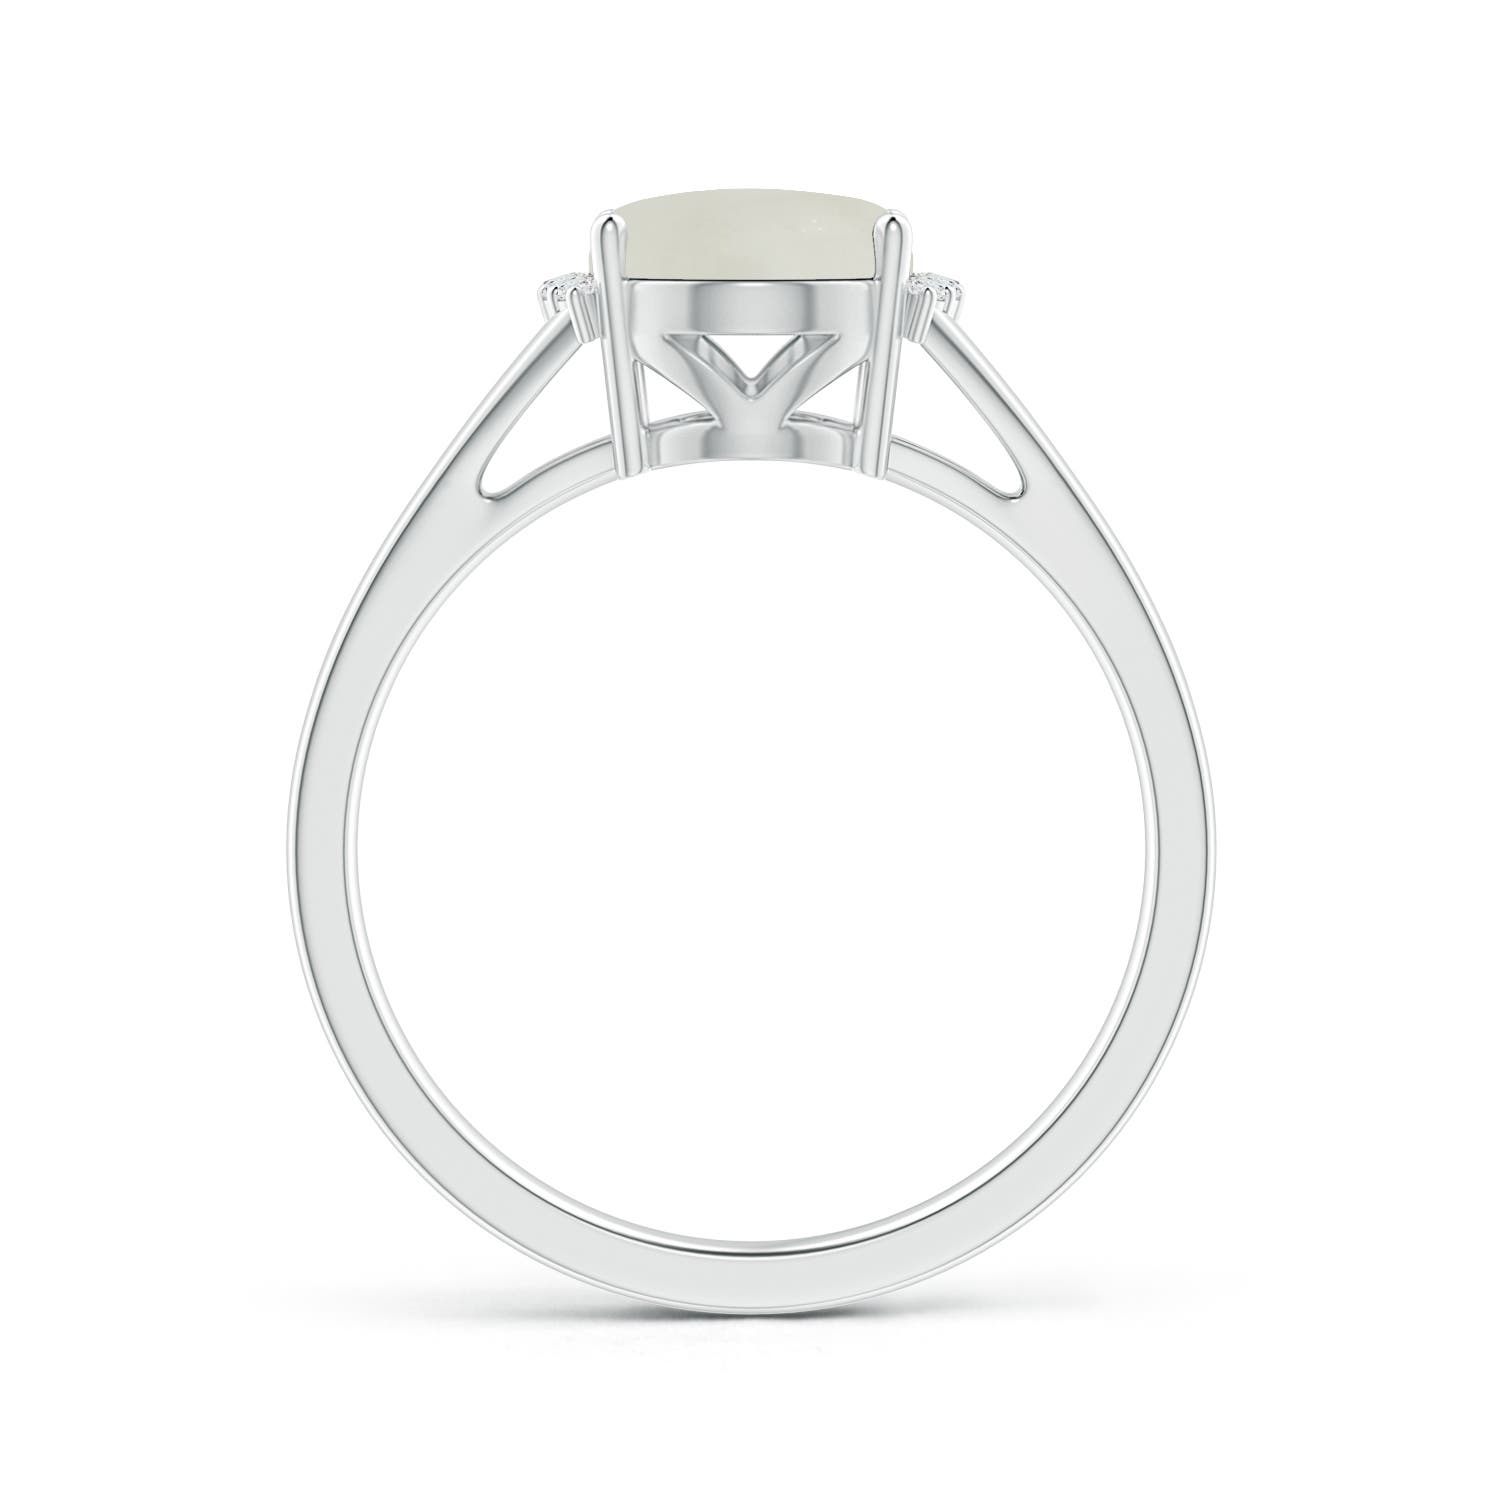 AAA - Moonstone / 1.77 CT / 14 KT White Gold